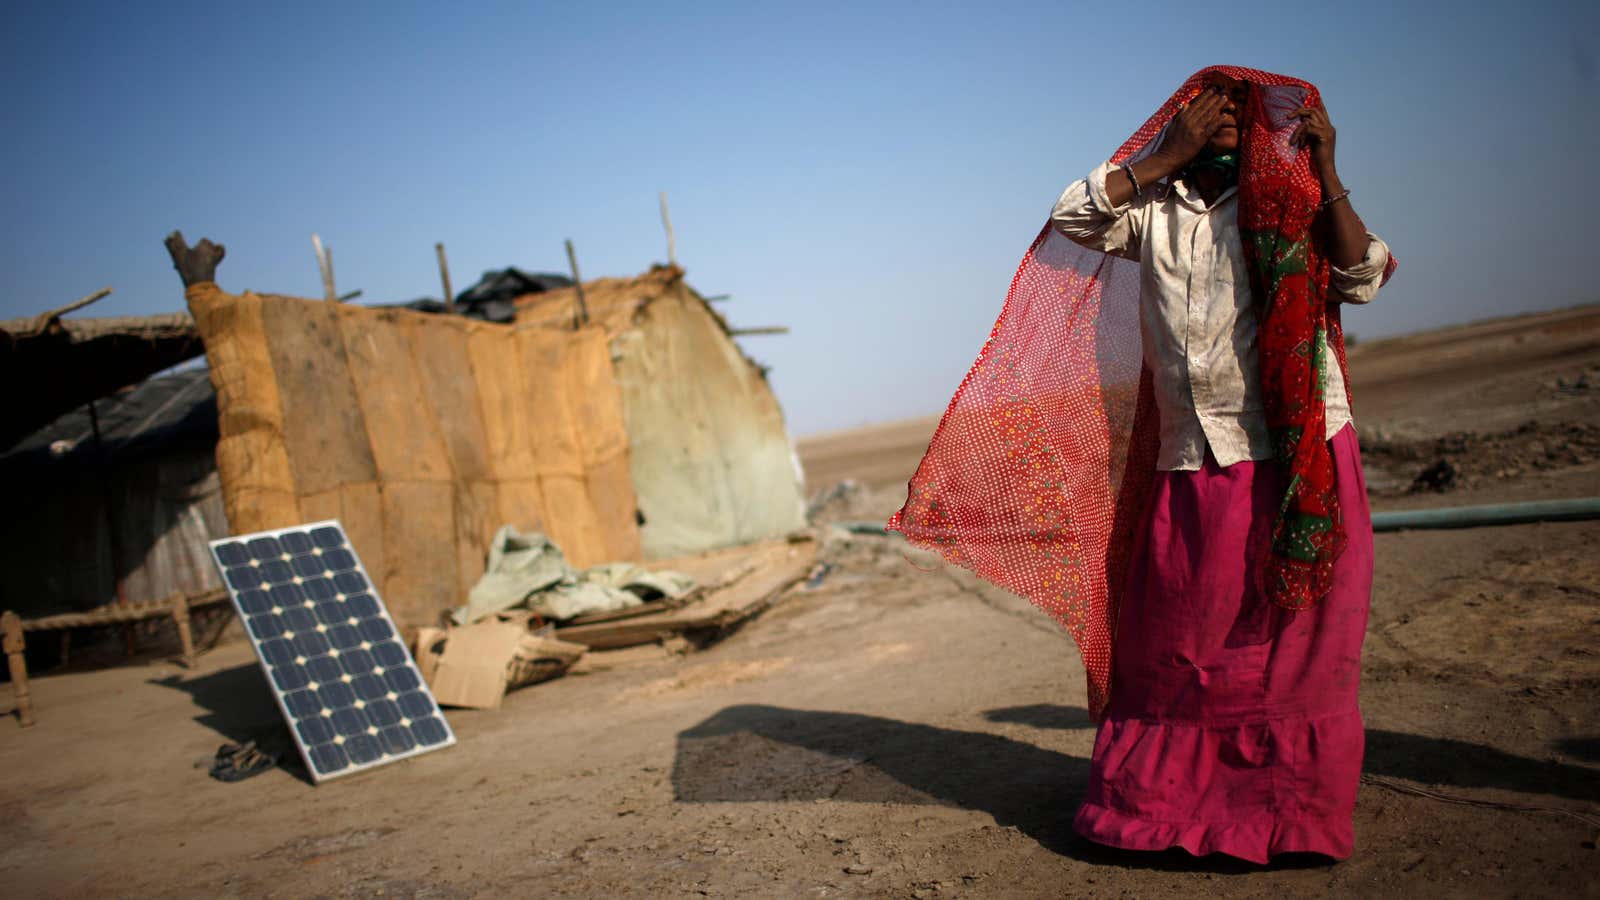 Solar energy is transforming rural India, but more can be done